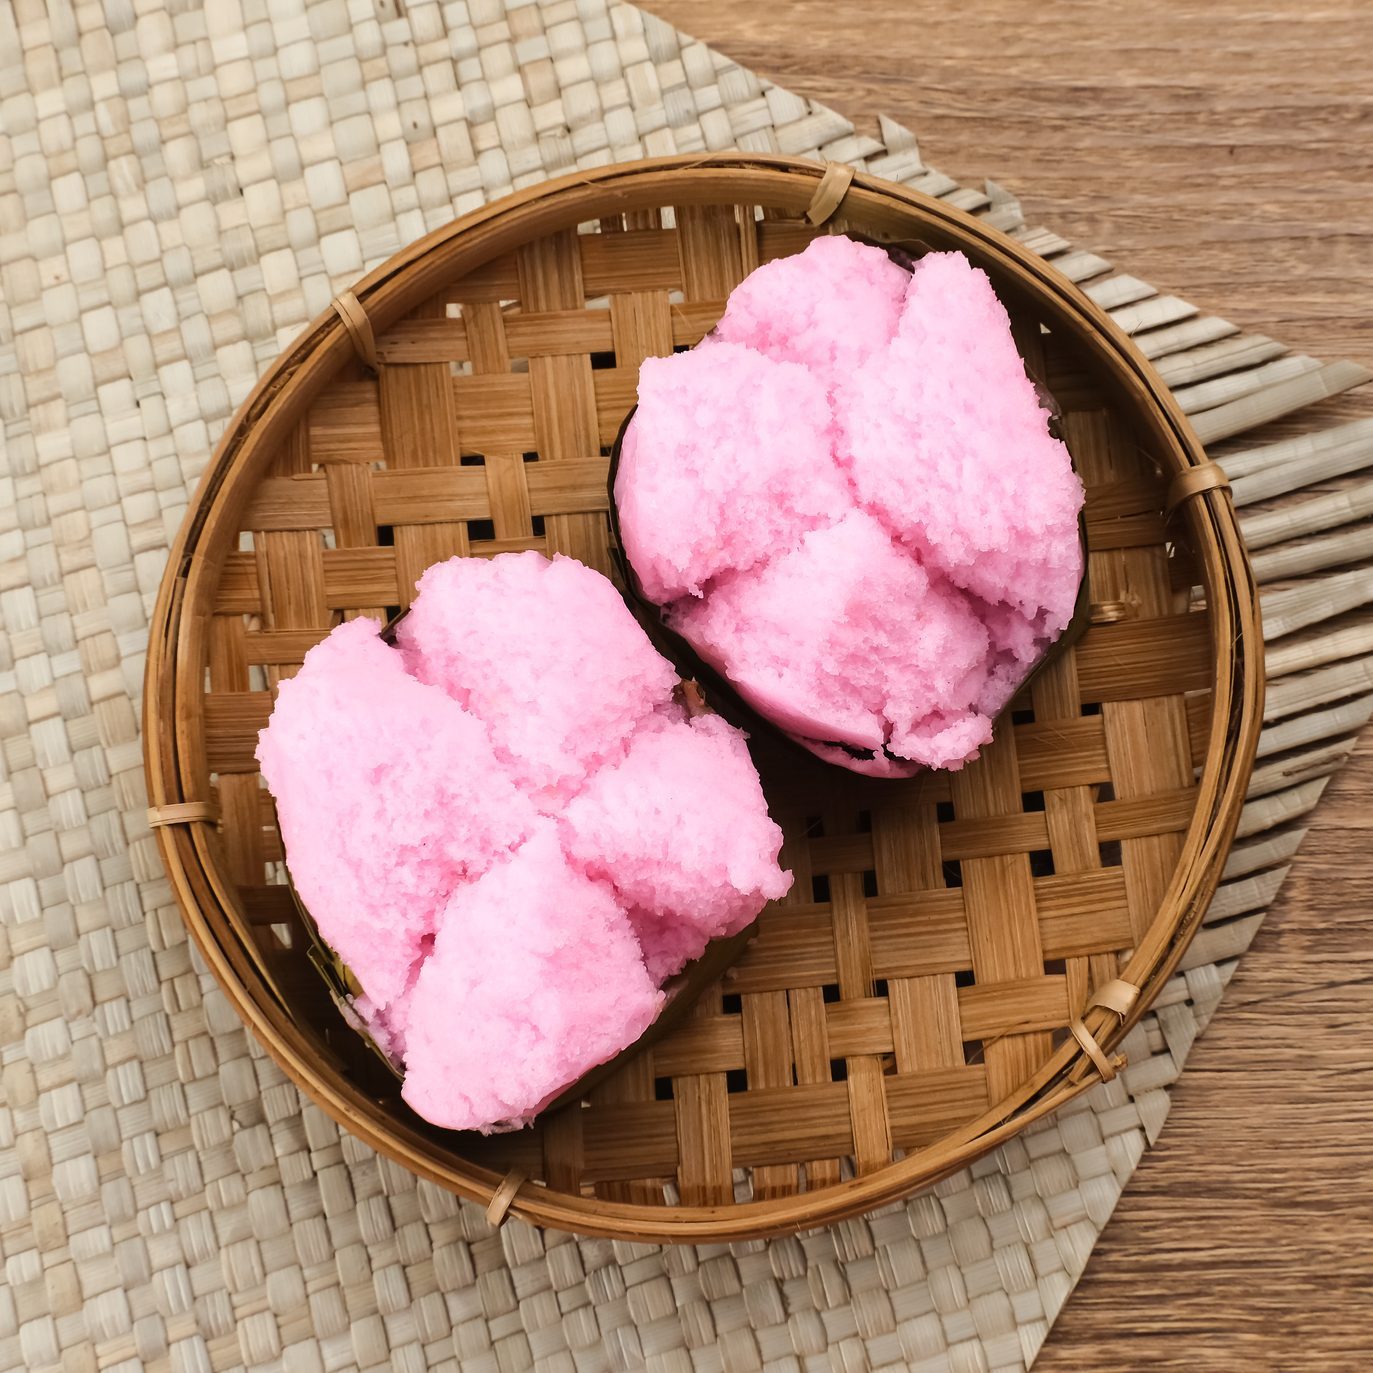 Happy Lunar/Chinese New Year: Lucky Foods Edition – SQ Online